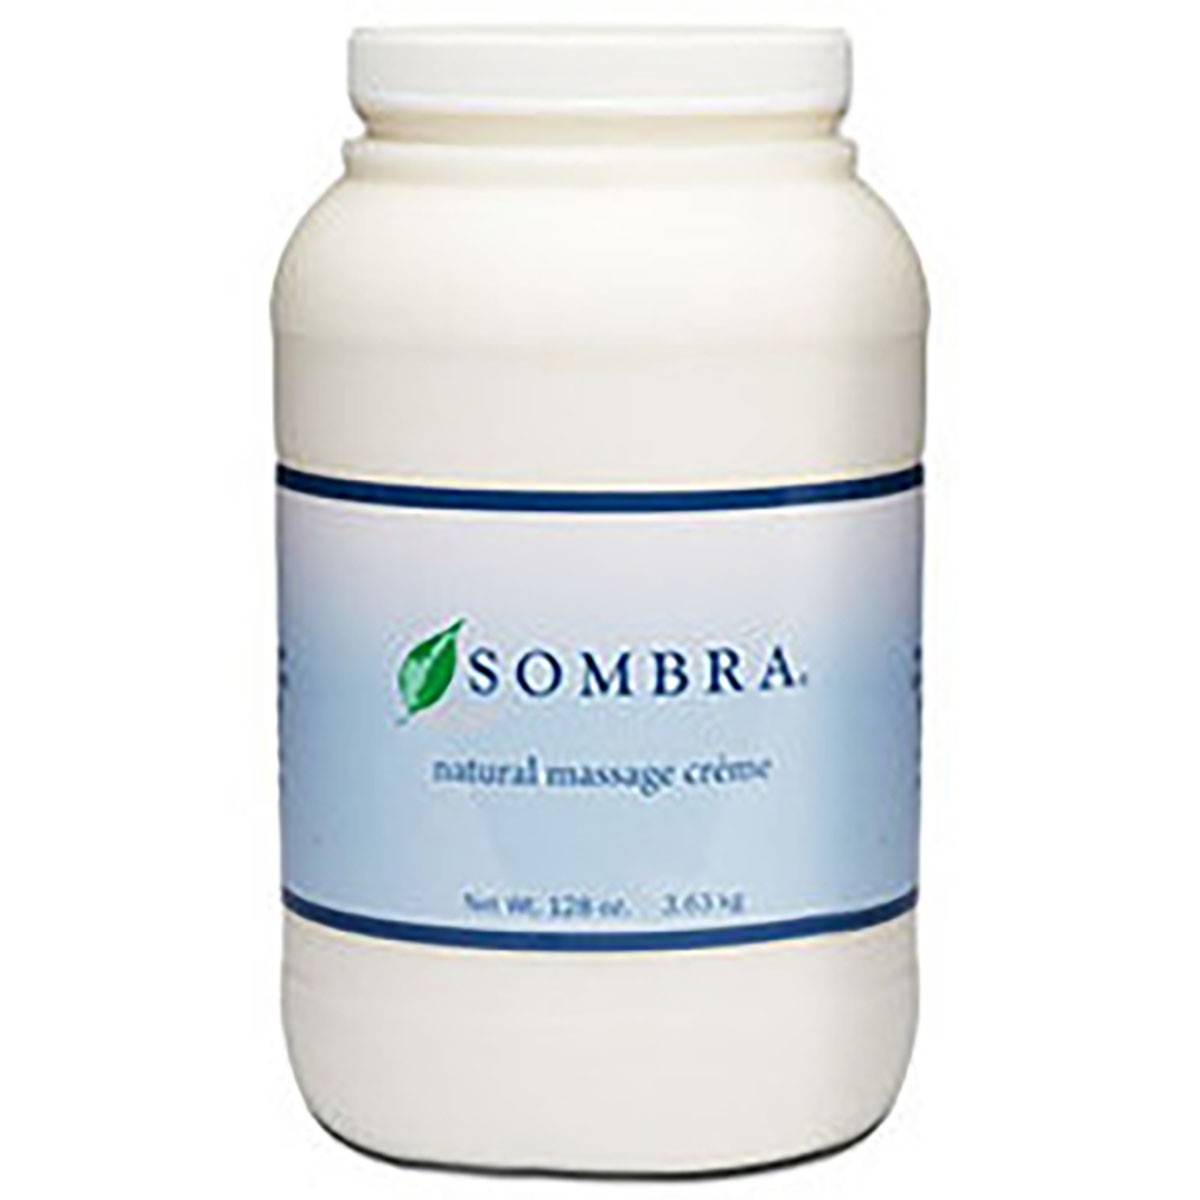 Picture of Sombra 14-1651 1 gal Sombra Natural Massage Cream